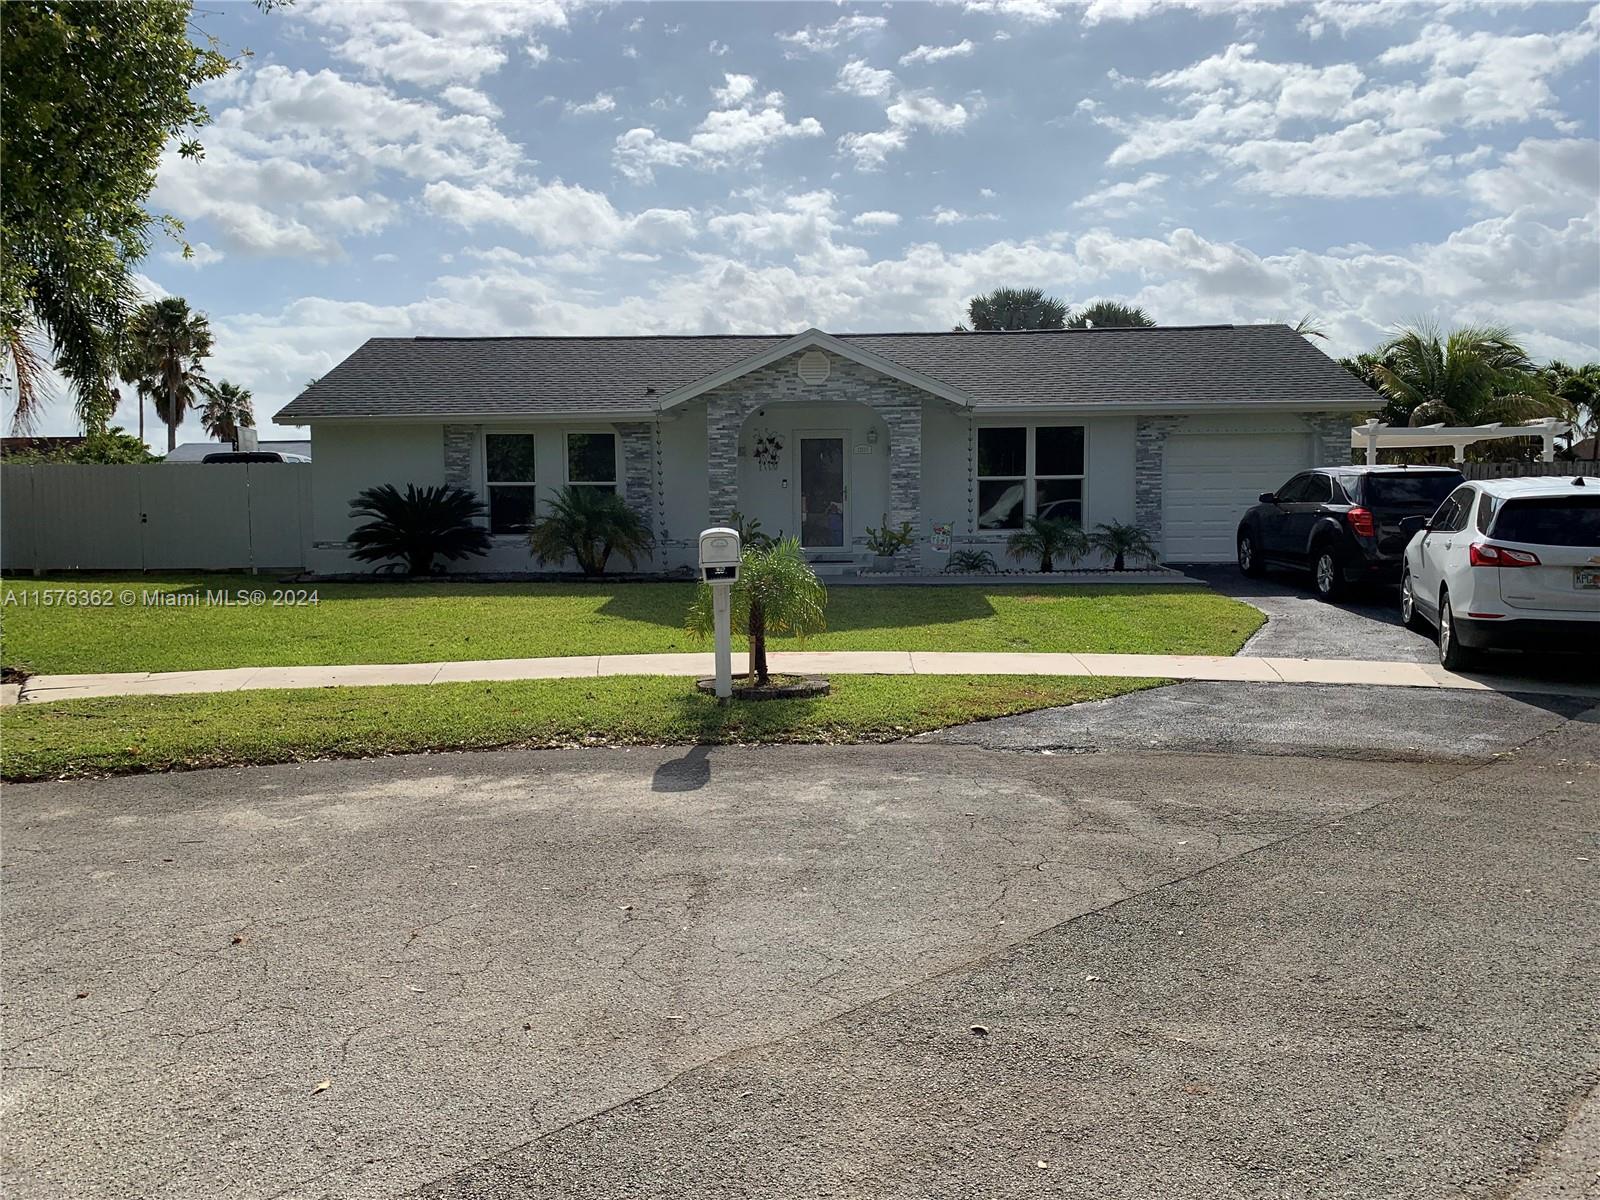 Excellent opportunity to own this property and make it your dream home. Great backyard to spend quality time with family and friends, pool is awesome. Plenty space for a boat, RV, etc., High-Impact Doors and windows, Roof was done 9/10/2021. Don't miss this opportunity.